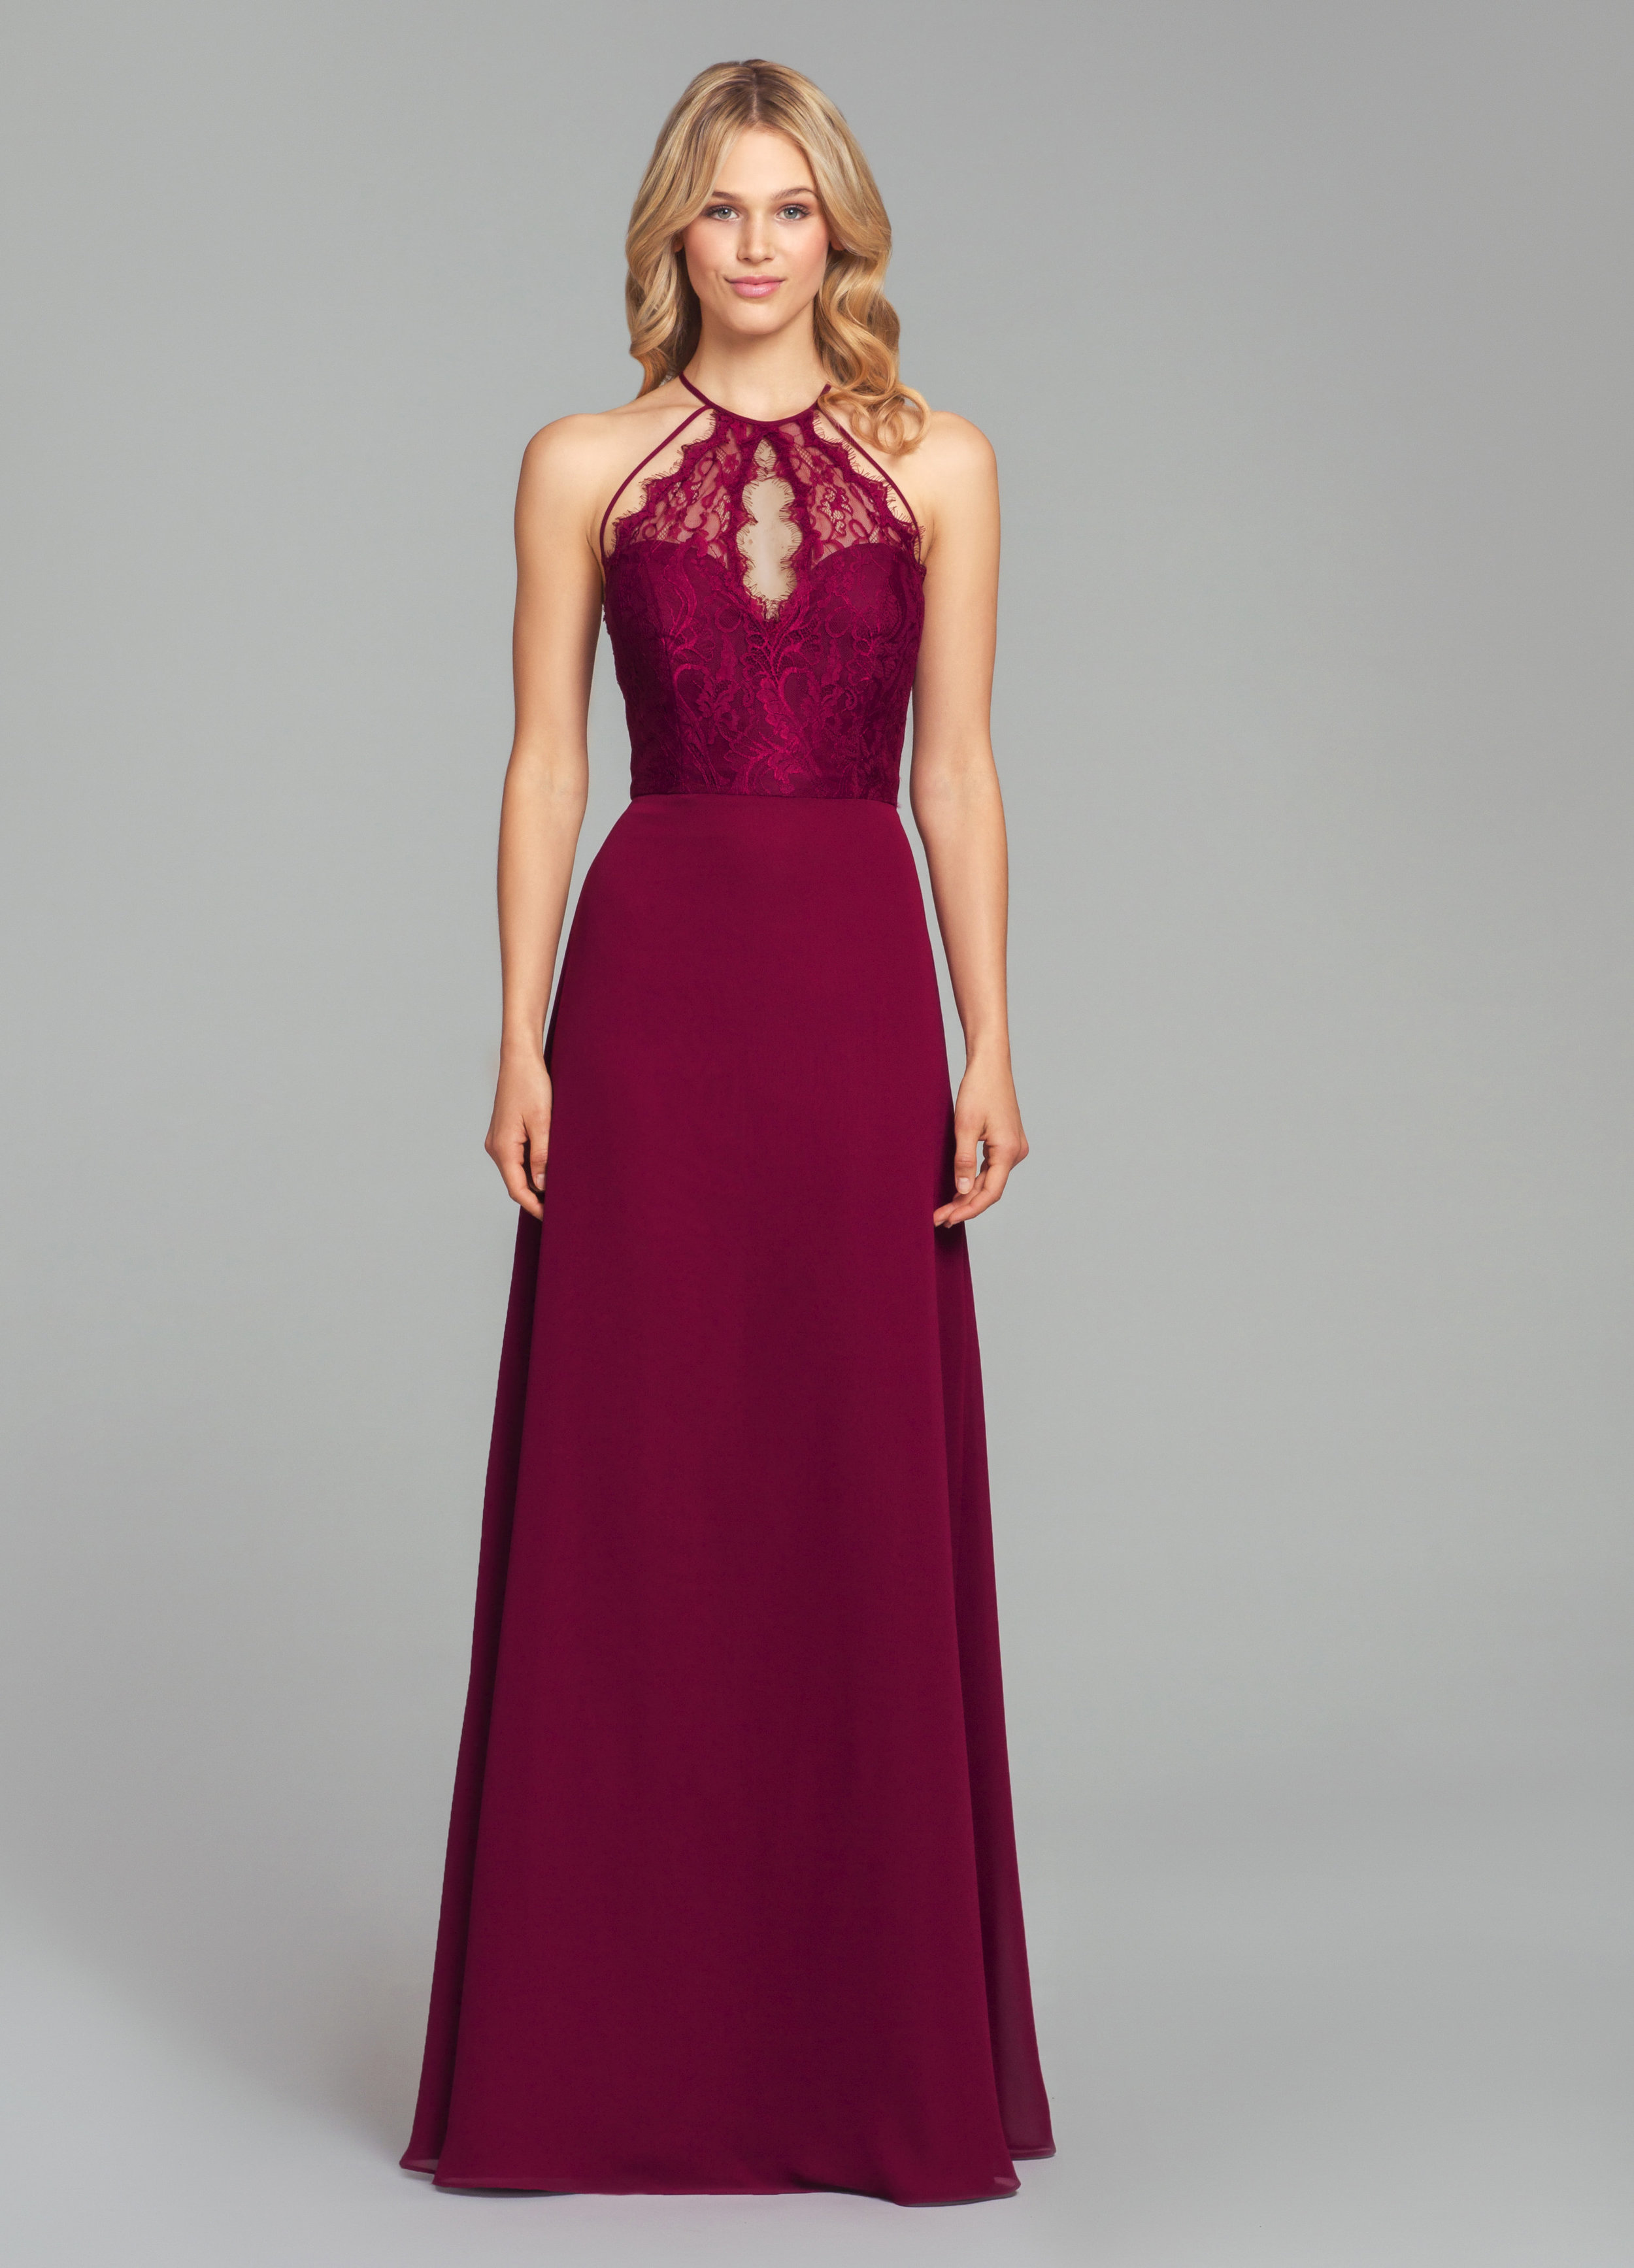 hayley-paige-occasions-bridesmaids-fall-2018-style-5857_2 (1).jpg